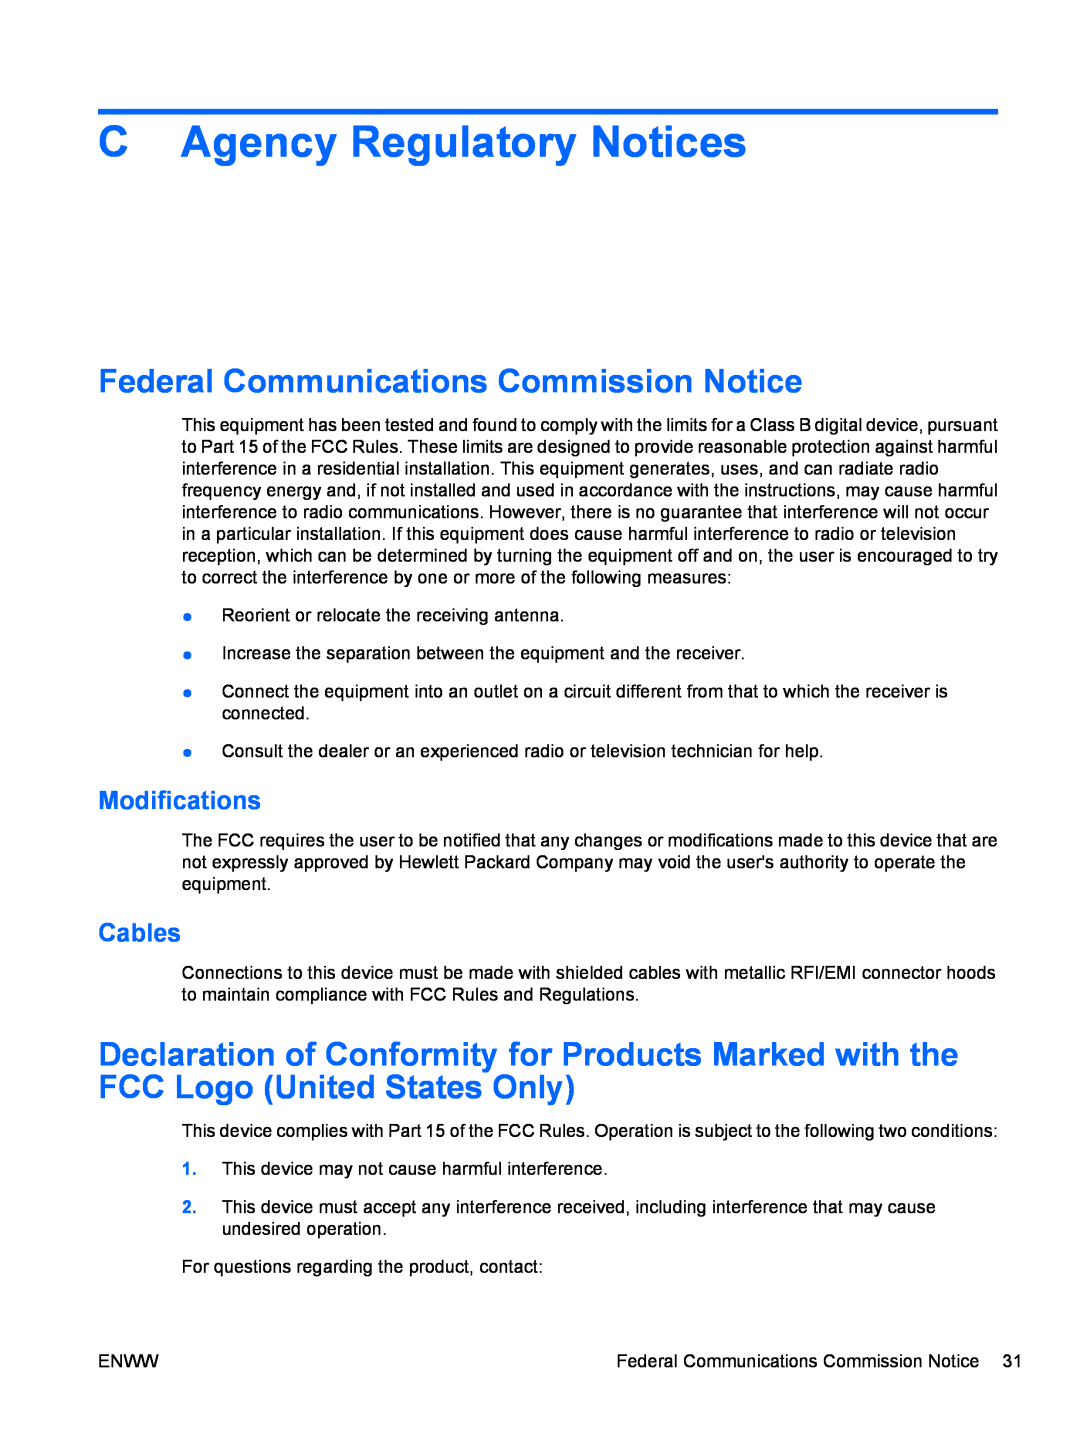 HP Q2210S, Q2010S, Q1910S C Agency Regulatory Notices, Federal Communications Commission Notice, Modifications, Cables 